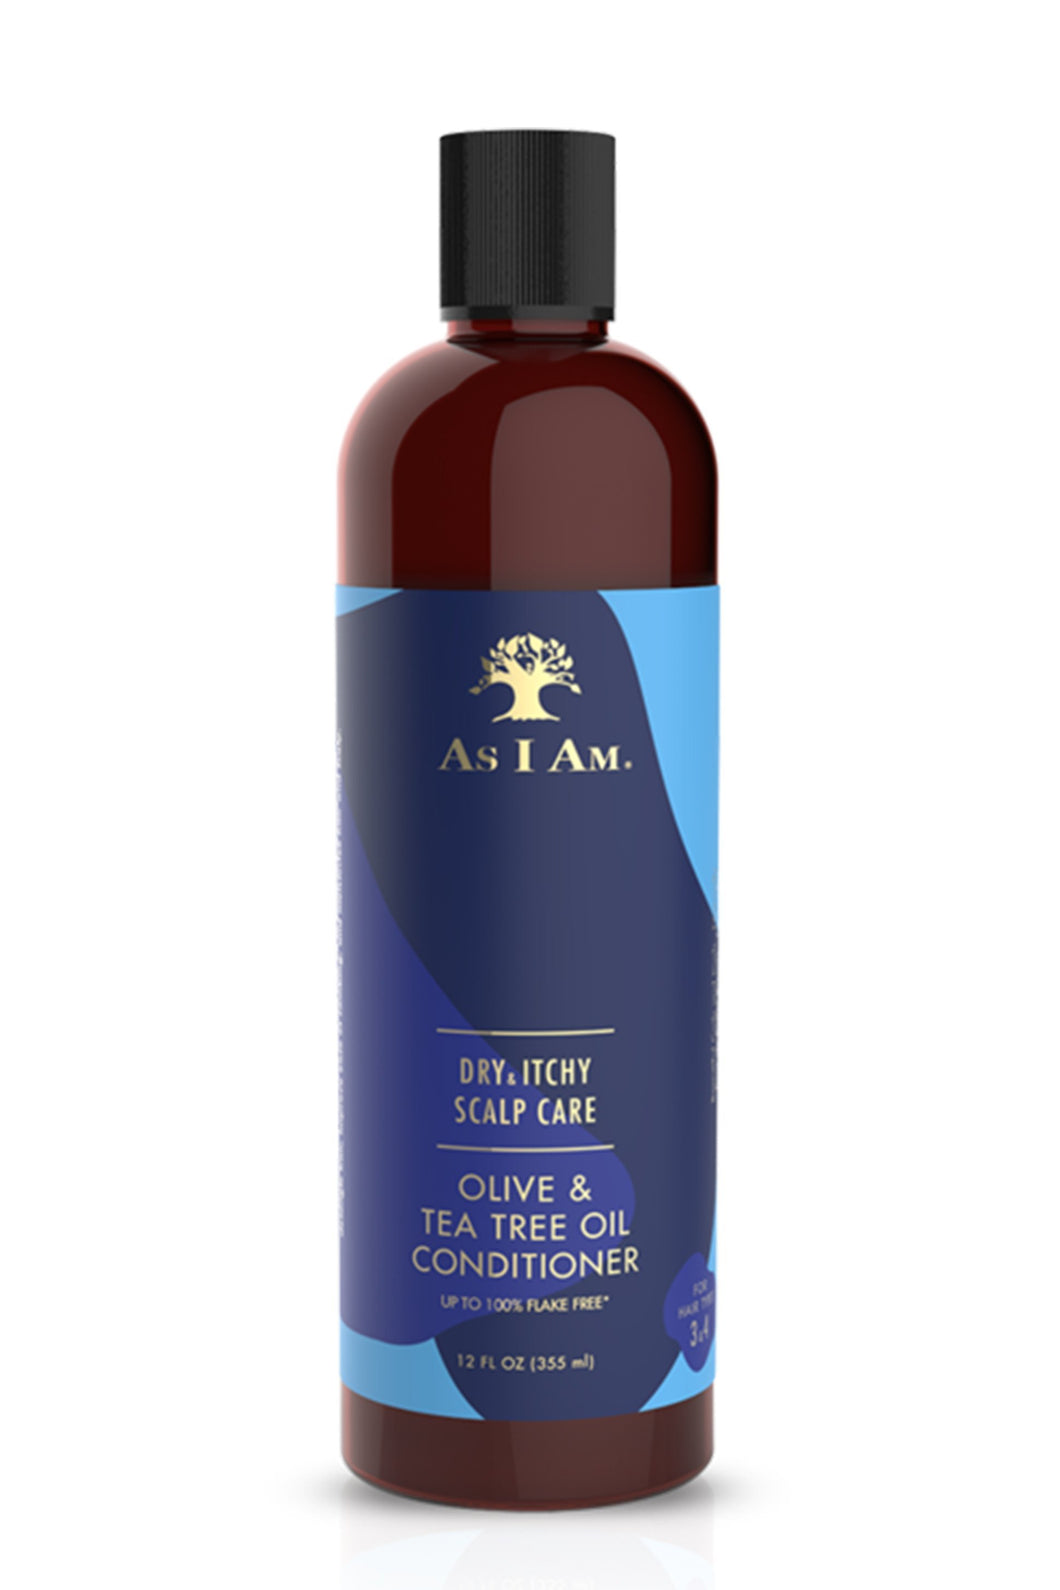 AS I AM Dry and Itchy Scalp Care Olive and Tea Tree Oil Conditioner Product Bottle